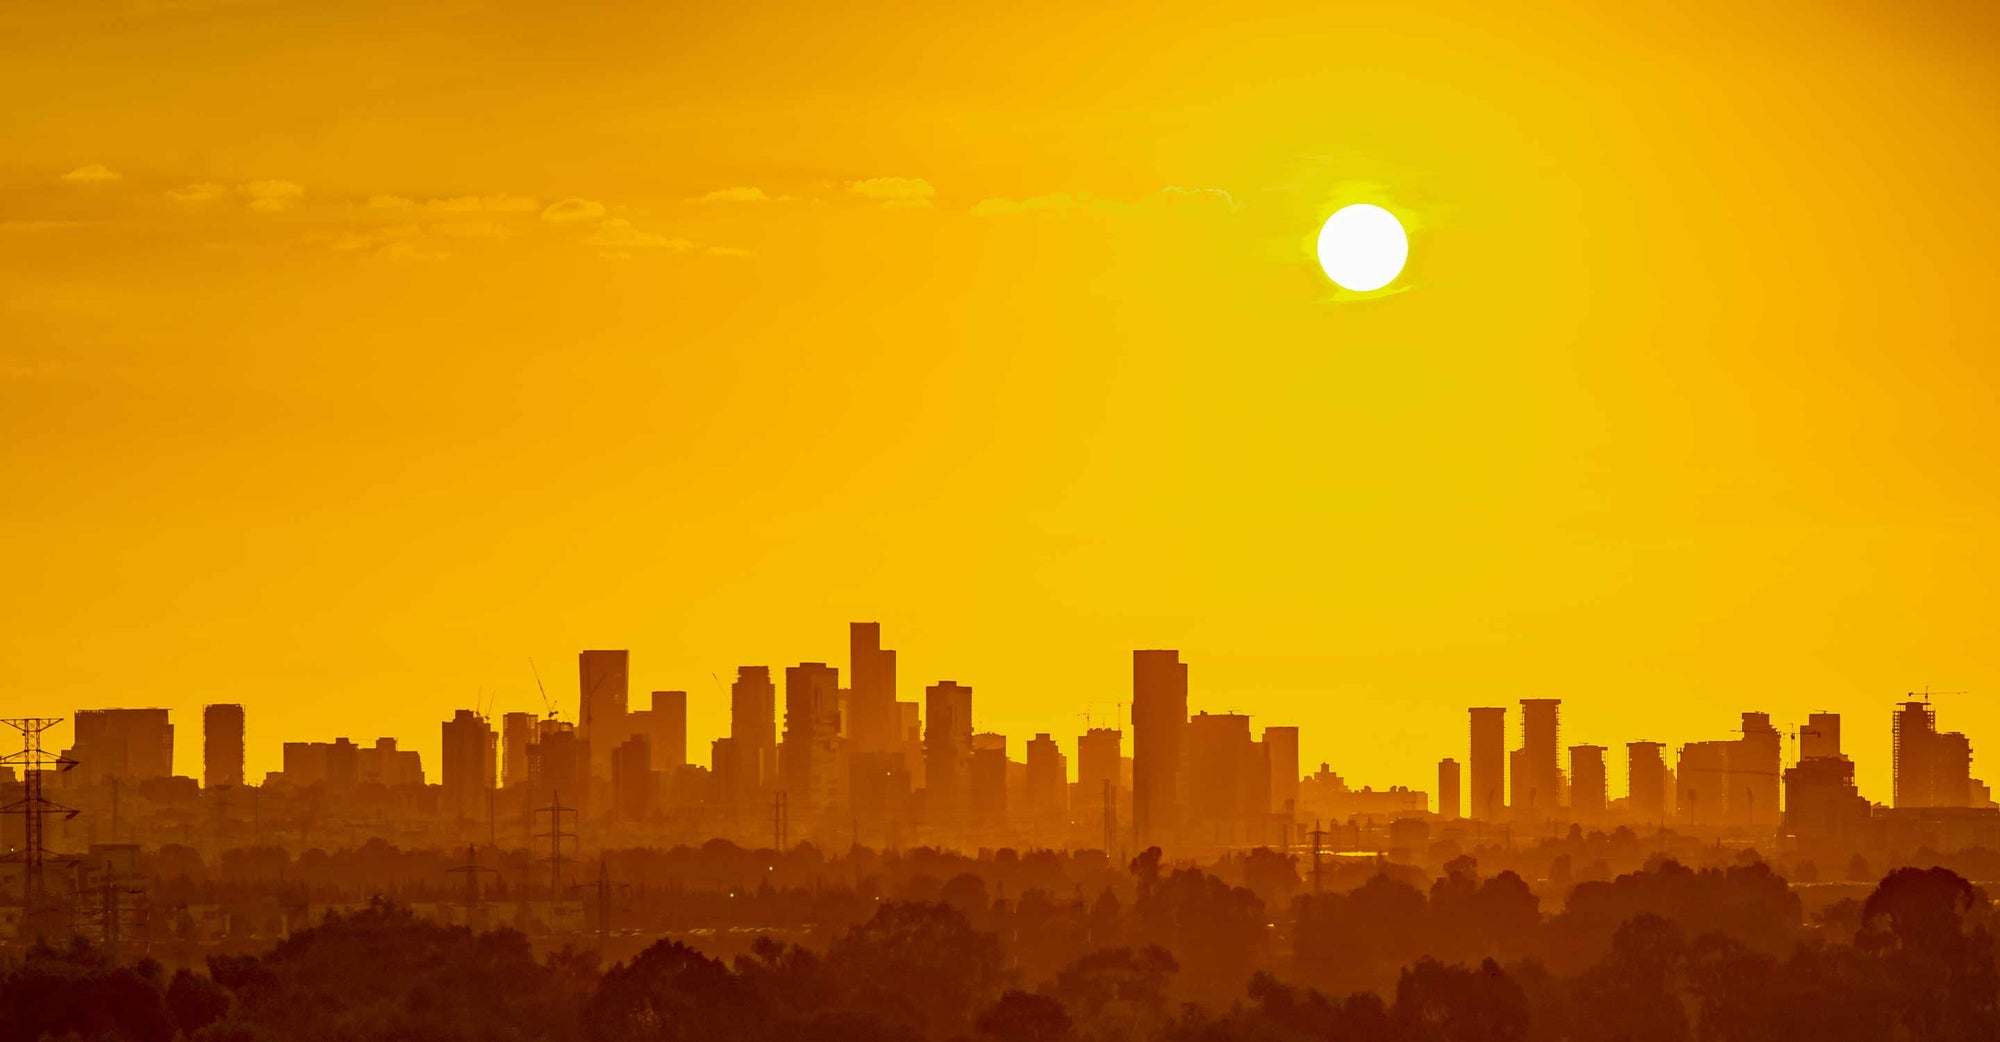 The sun rises over a city enduring a heat wave.